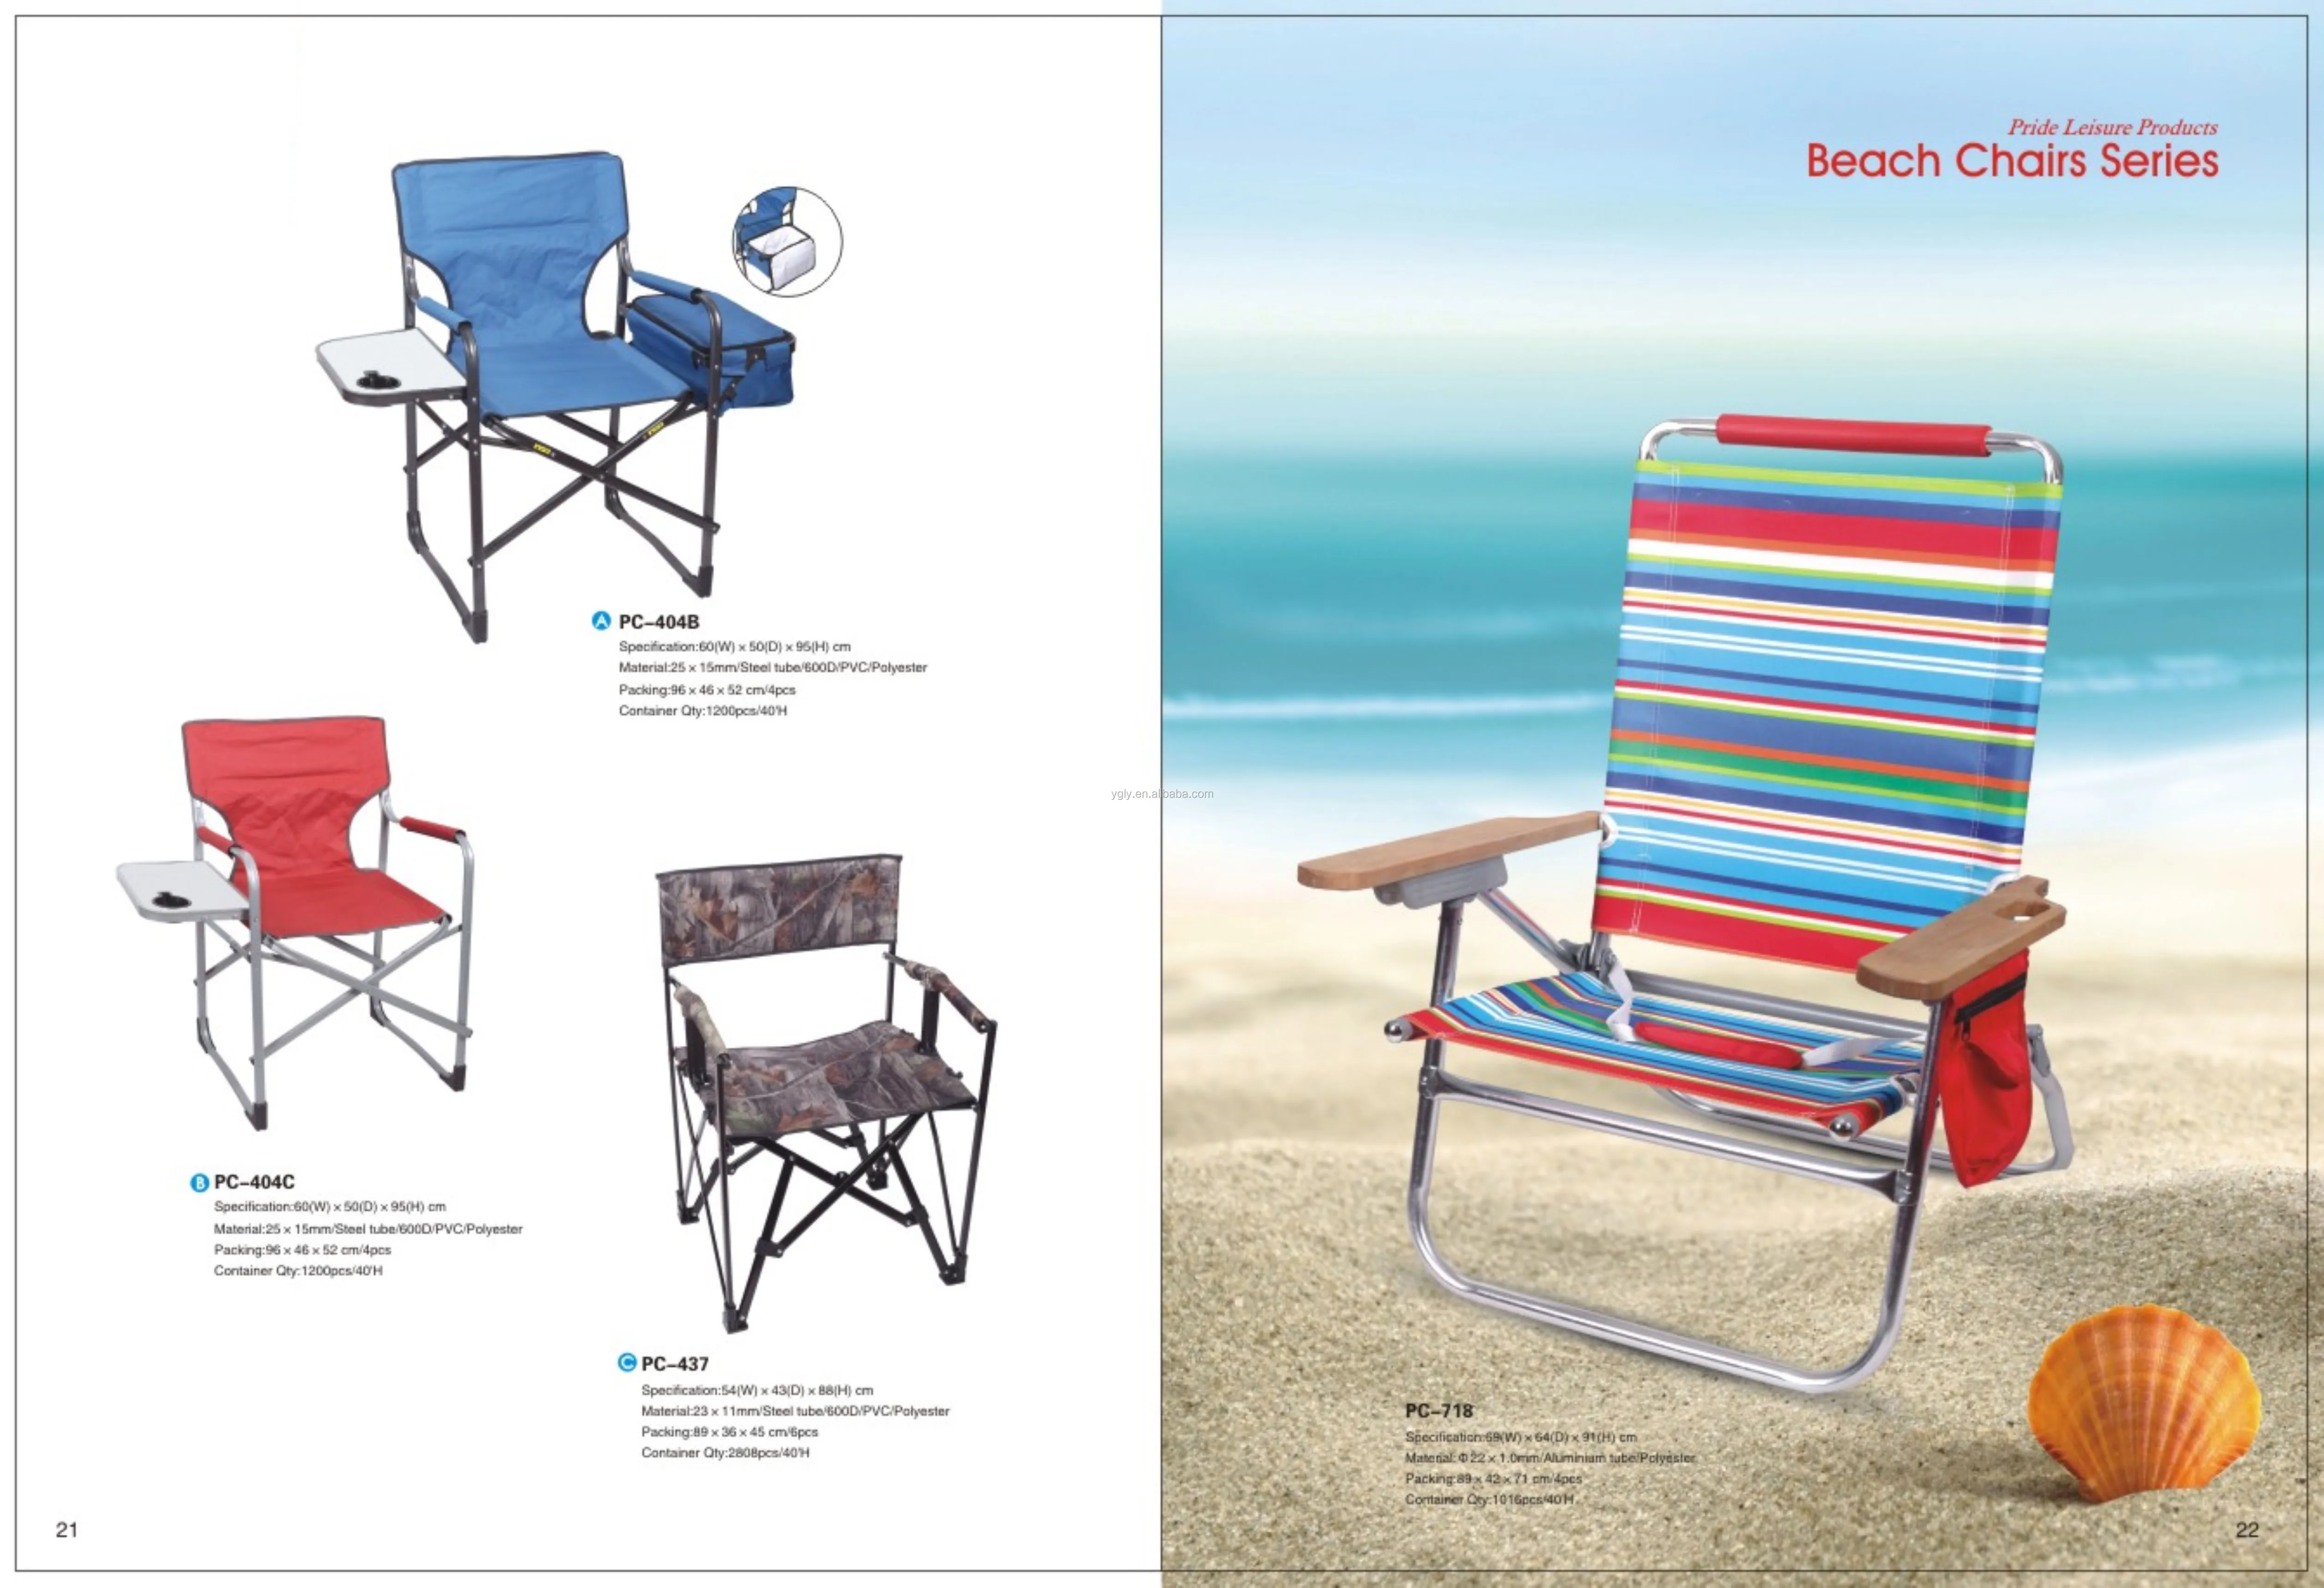 Aldi Folding Chair Cheapest Beach Metal Leisure Relax Folding Chair Cheap Metal Folding Chairs Target Folding Beach Chairs Buy Aldi Folding Chair Target Folding Beach Chairs Cheap Metal Folding Chairs Product On Alibaba Com